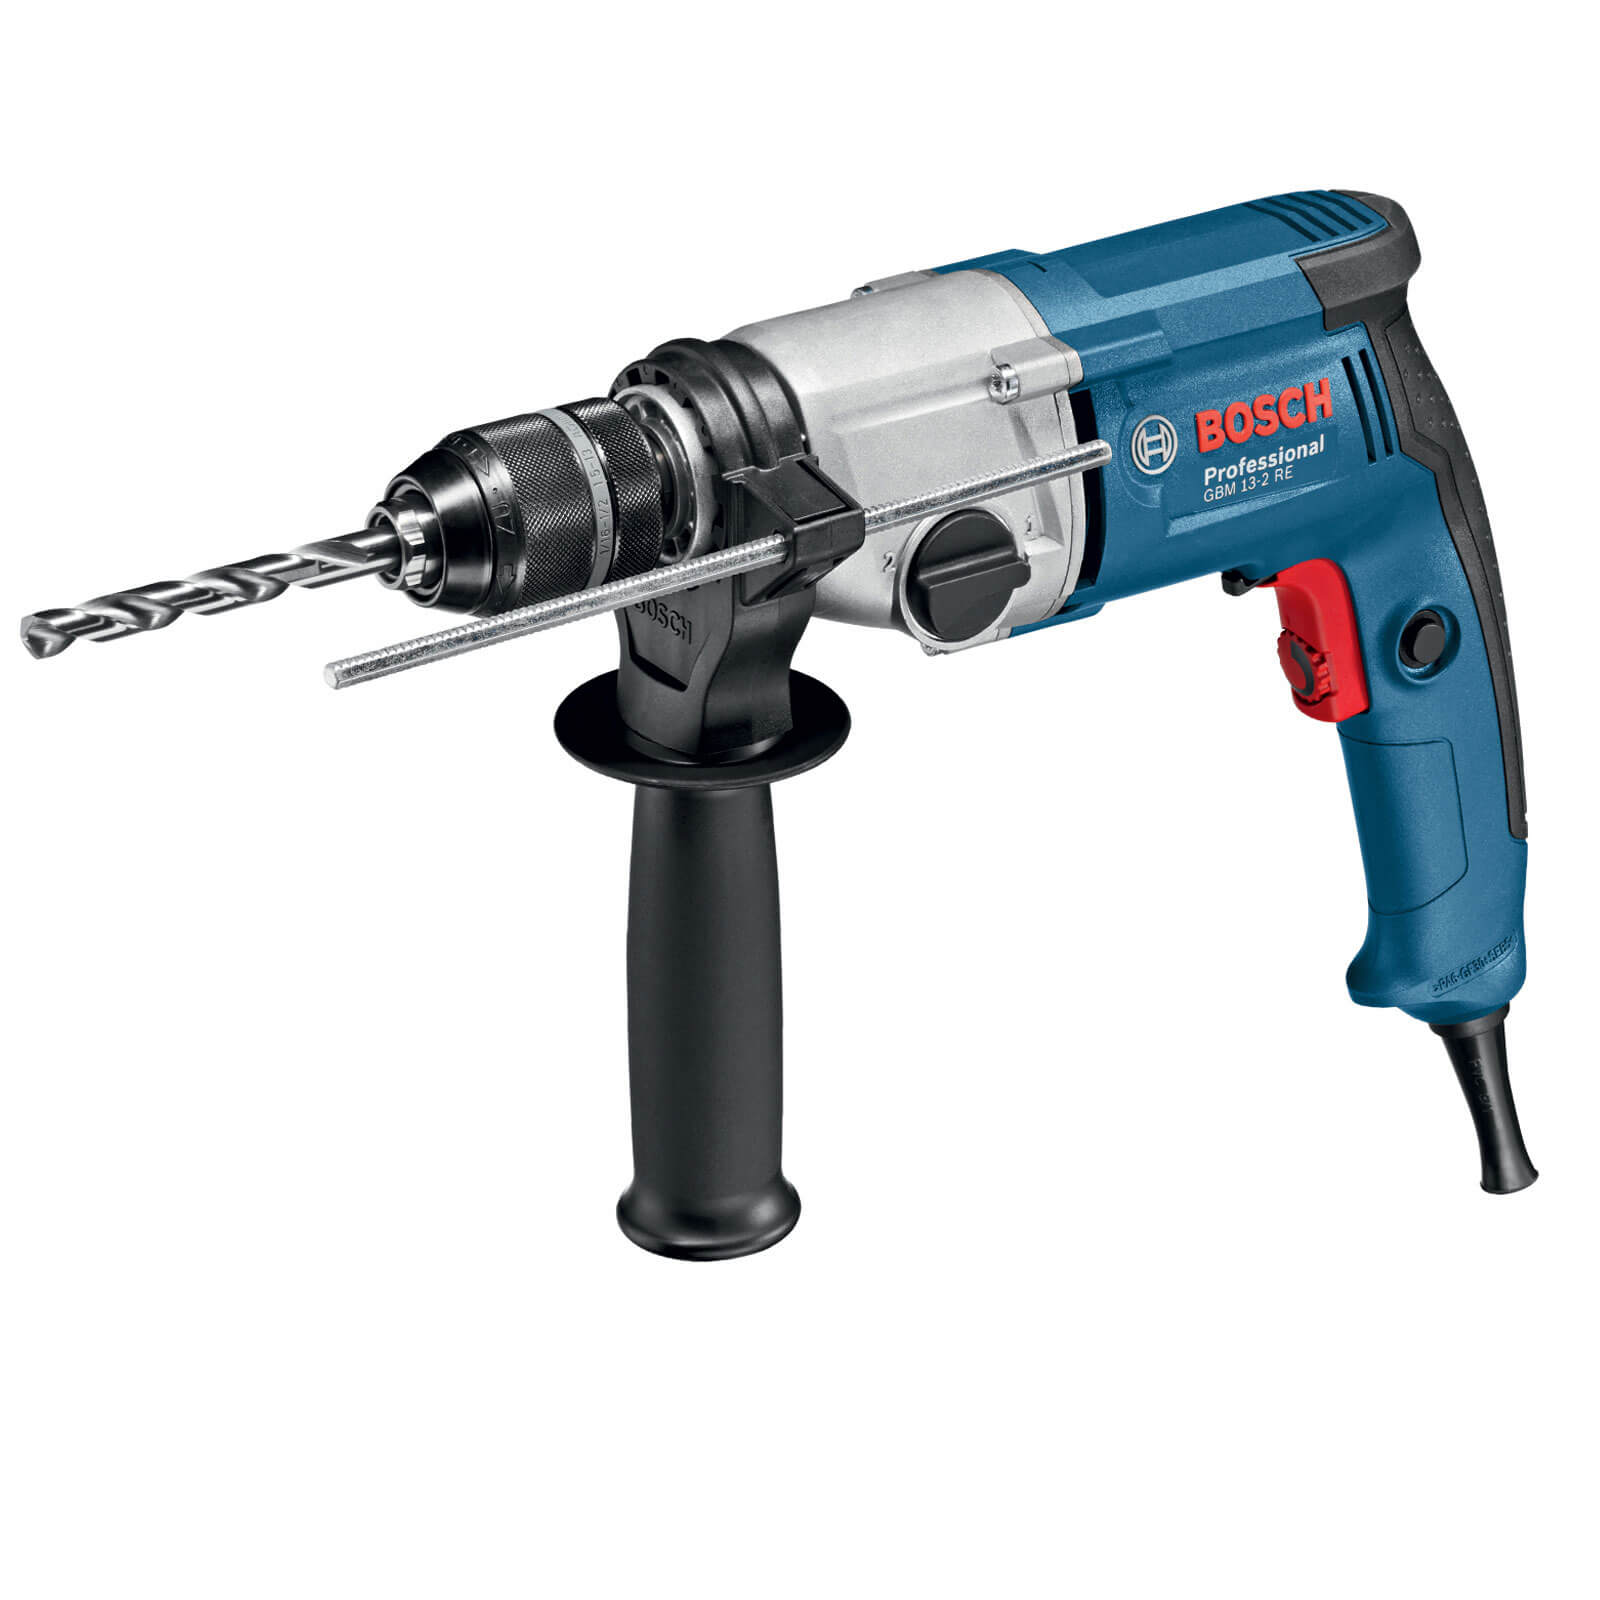 Image of Bosch GBM 13-2 RE Rotary Drill 110v